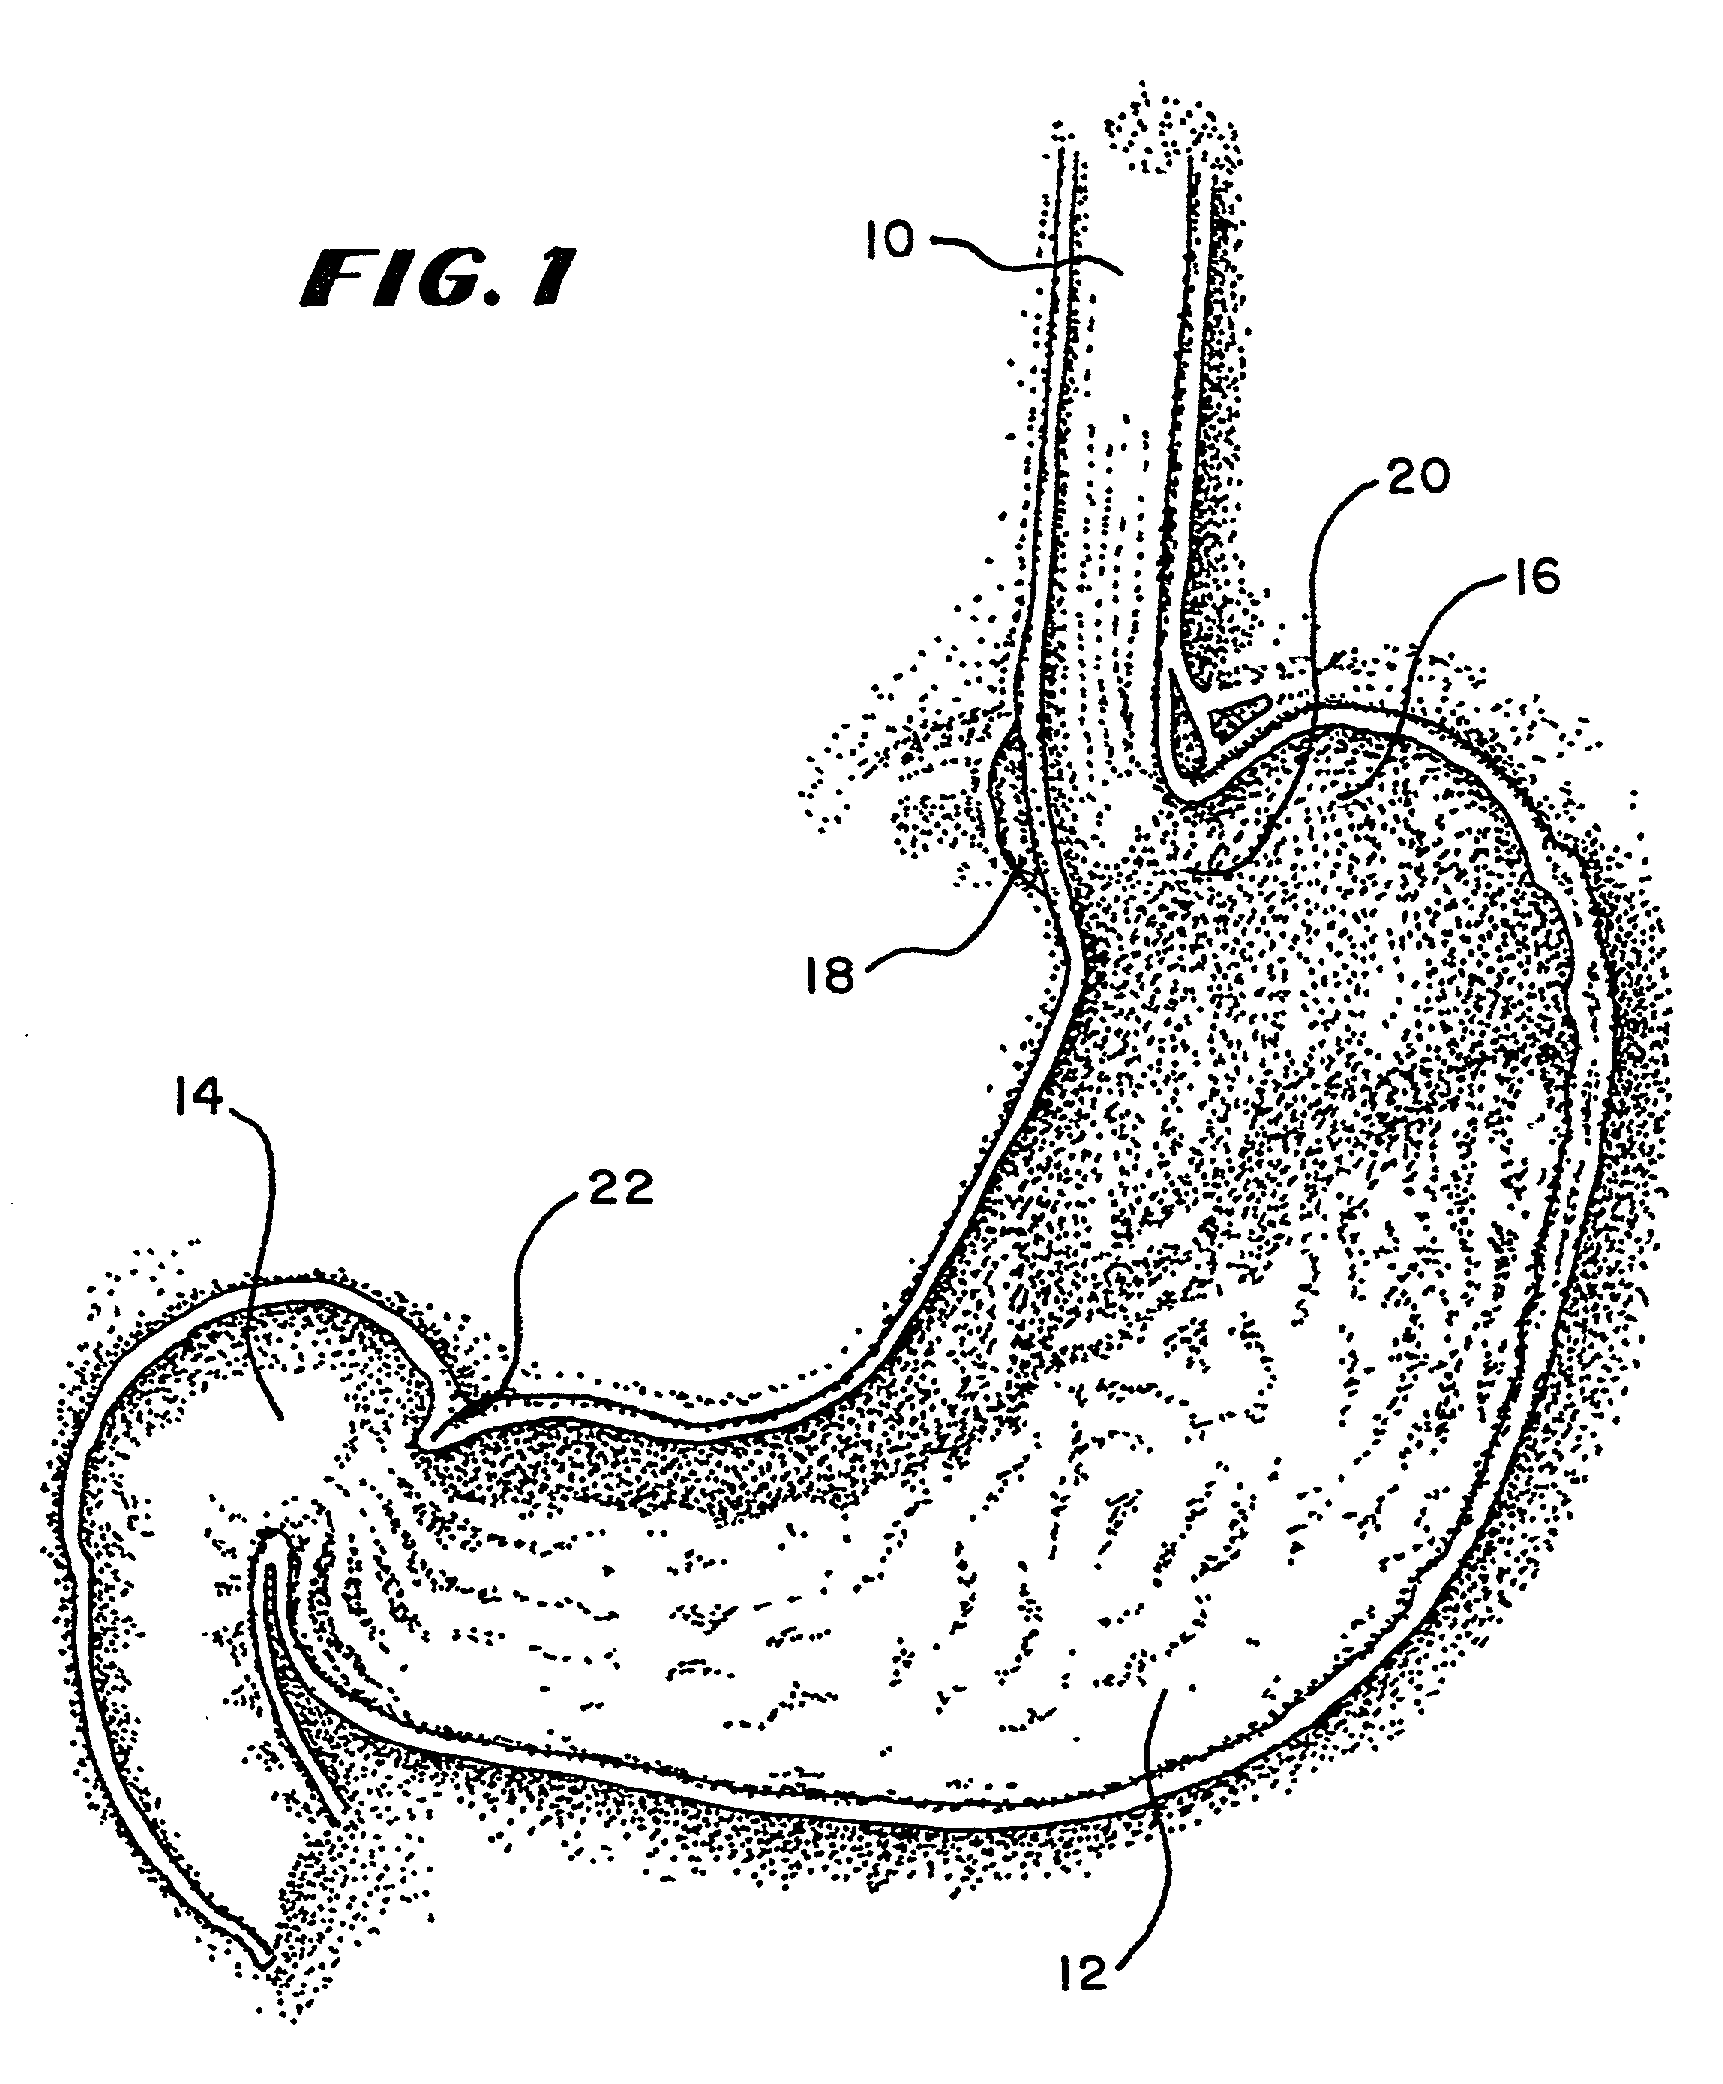 Graphical user interface for association with an electrode structure deployed in contact with a tissue region